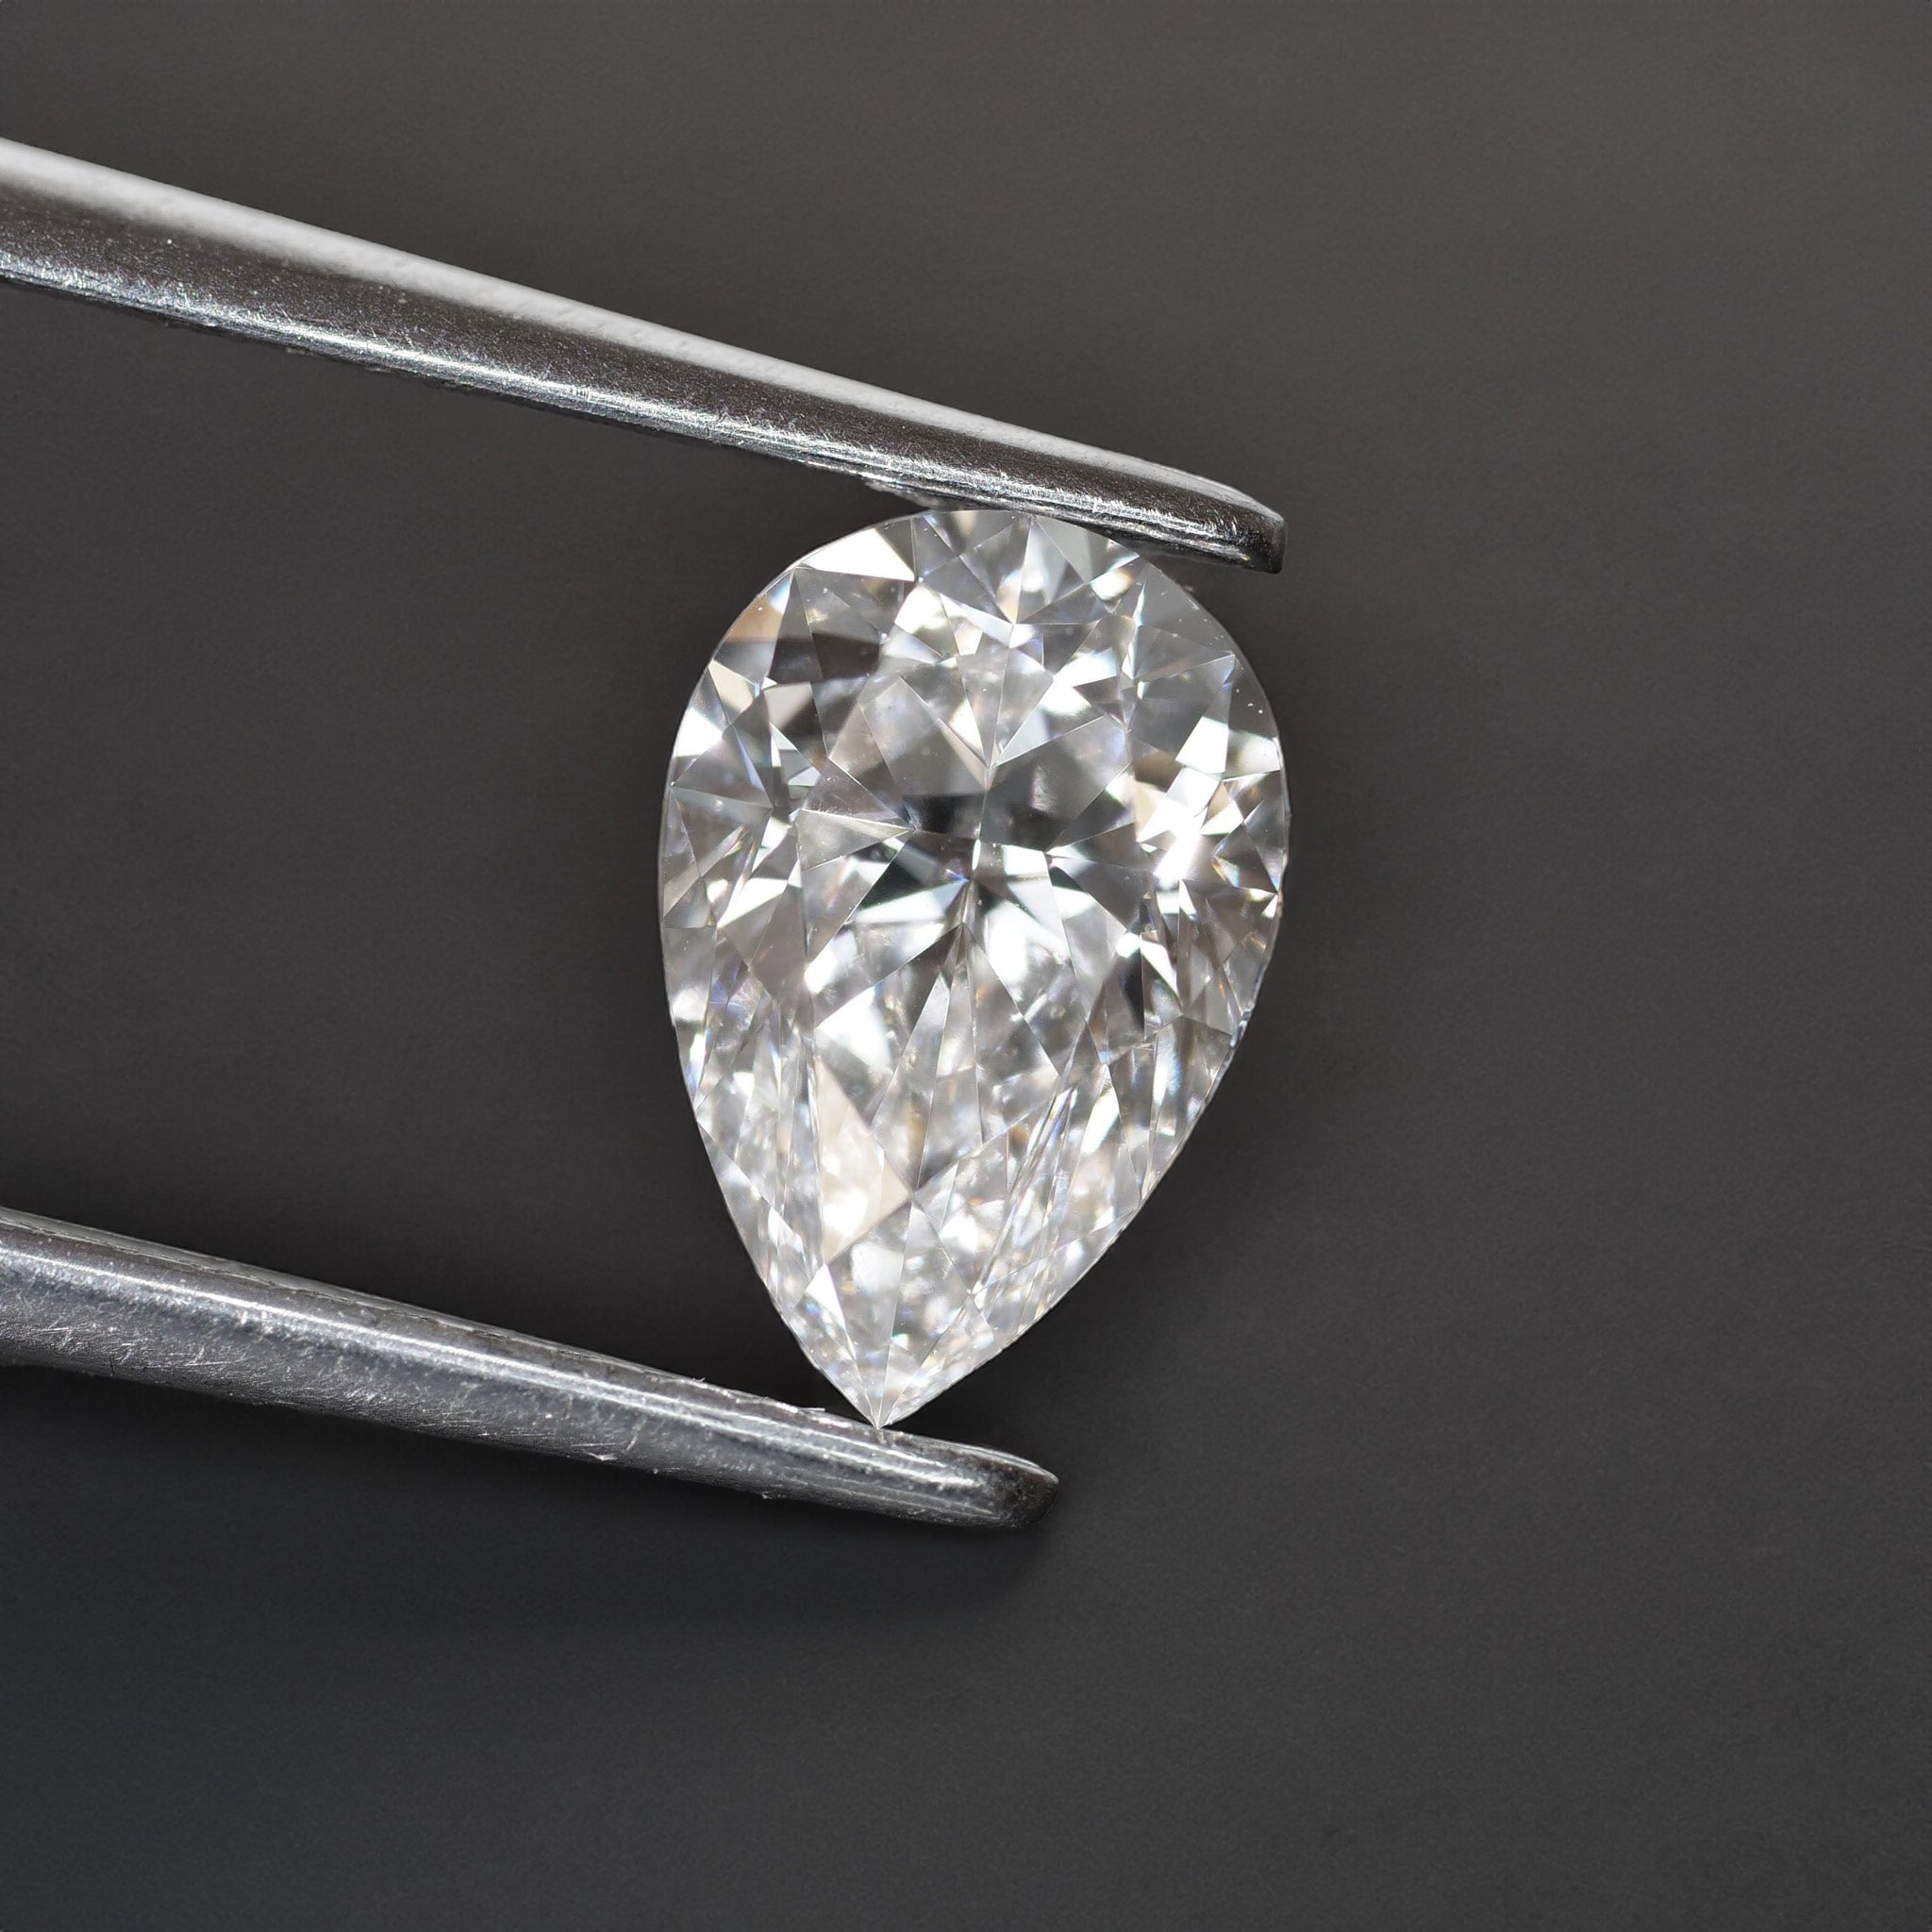 Natural diamond | GIA certified, pear cut 7x4,5 mm, D color, VS, 0.56ct - Eden Garden Jewelry™